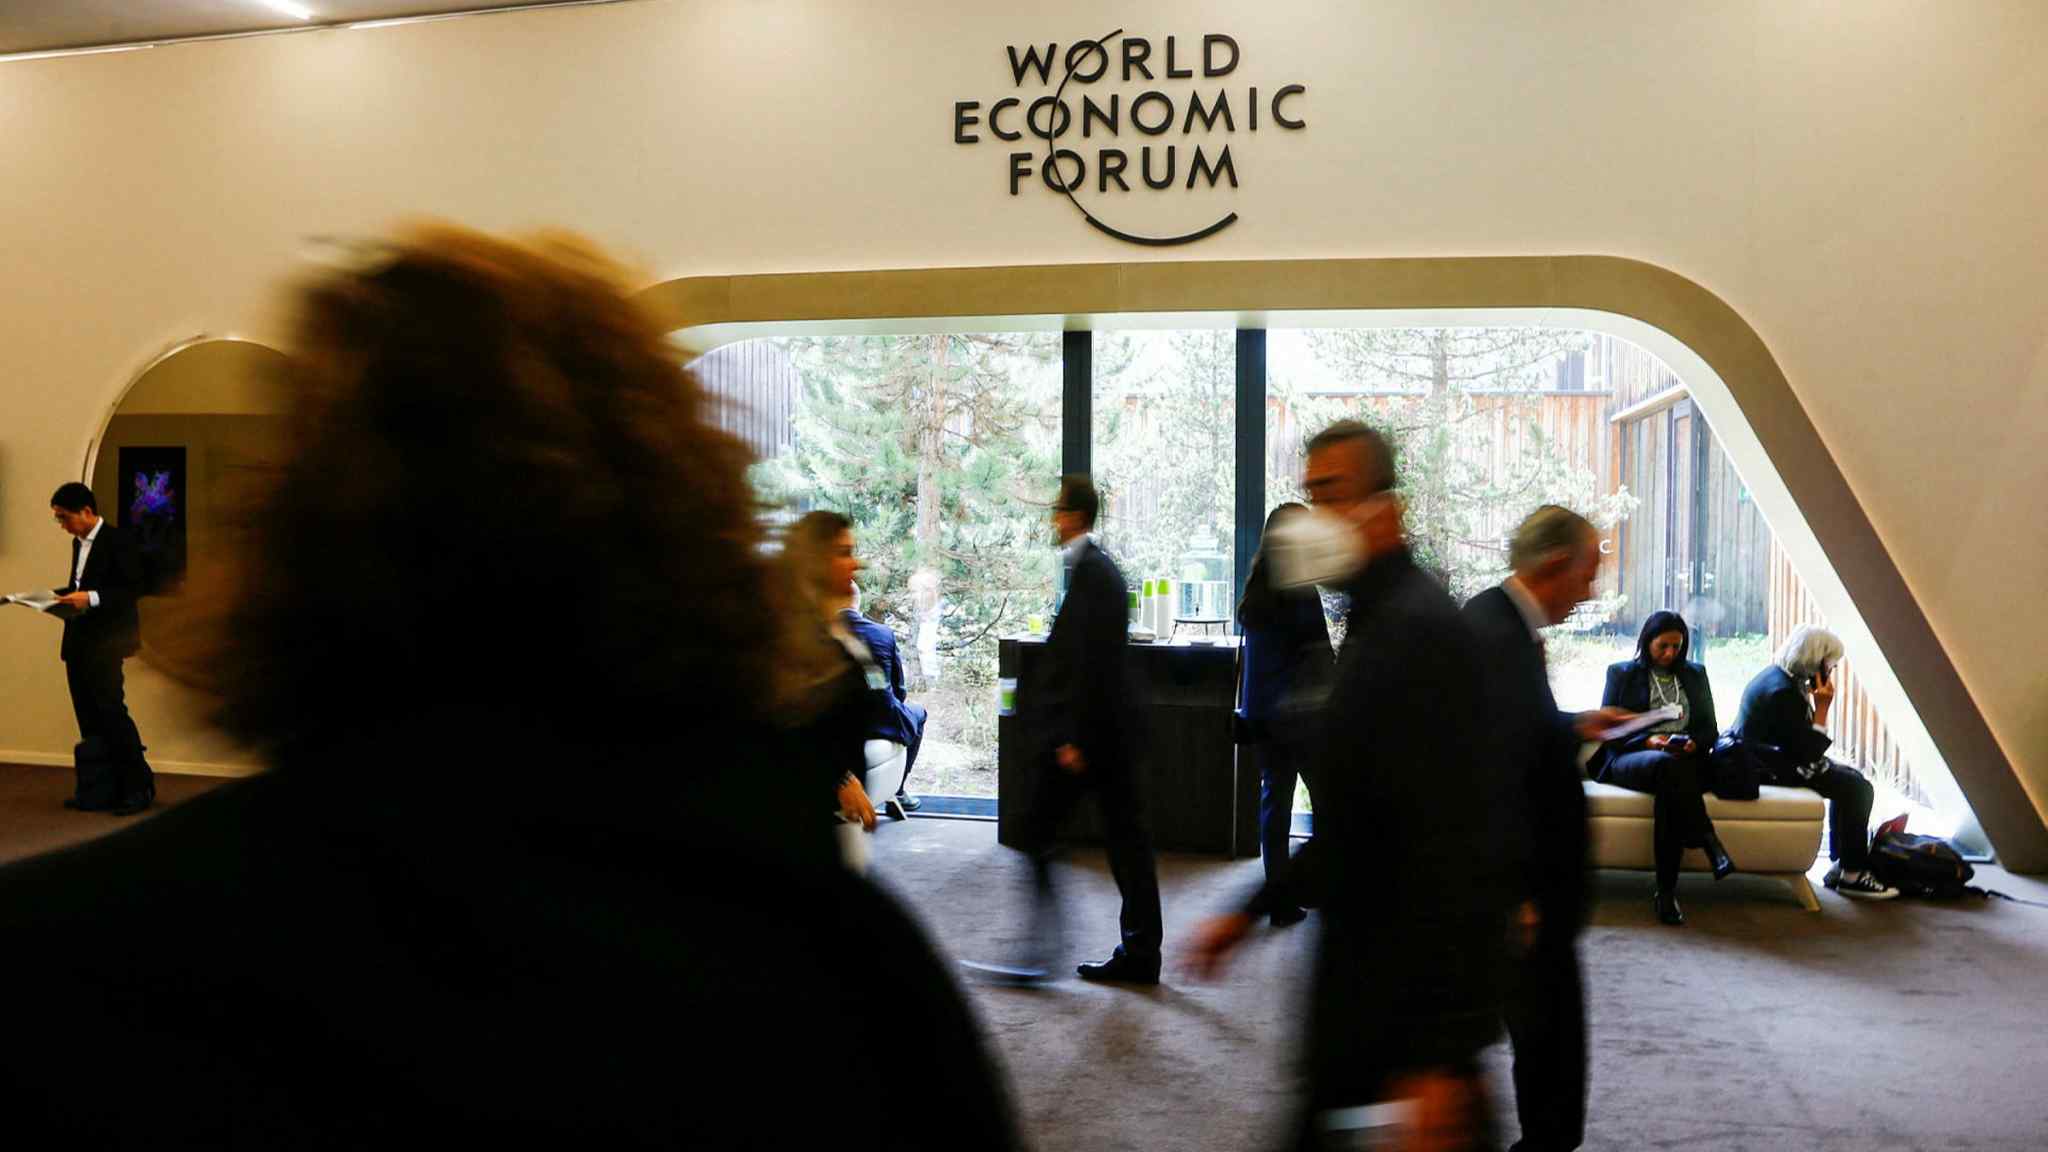 Sombre and uncertain mood descends on Davos